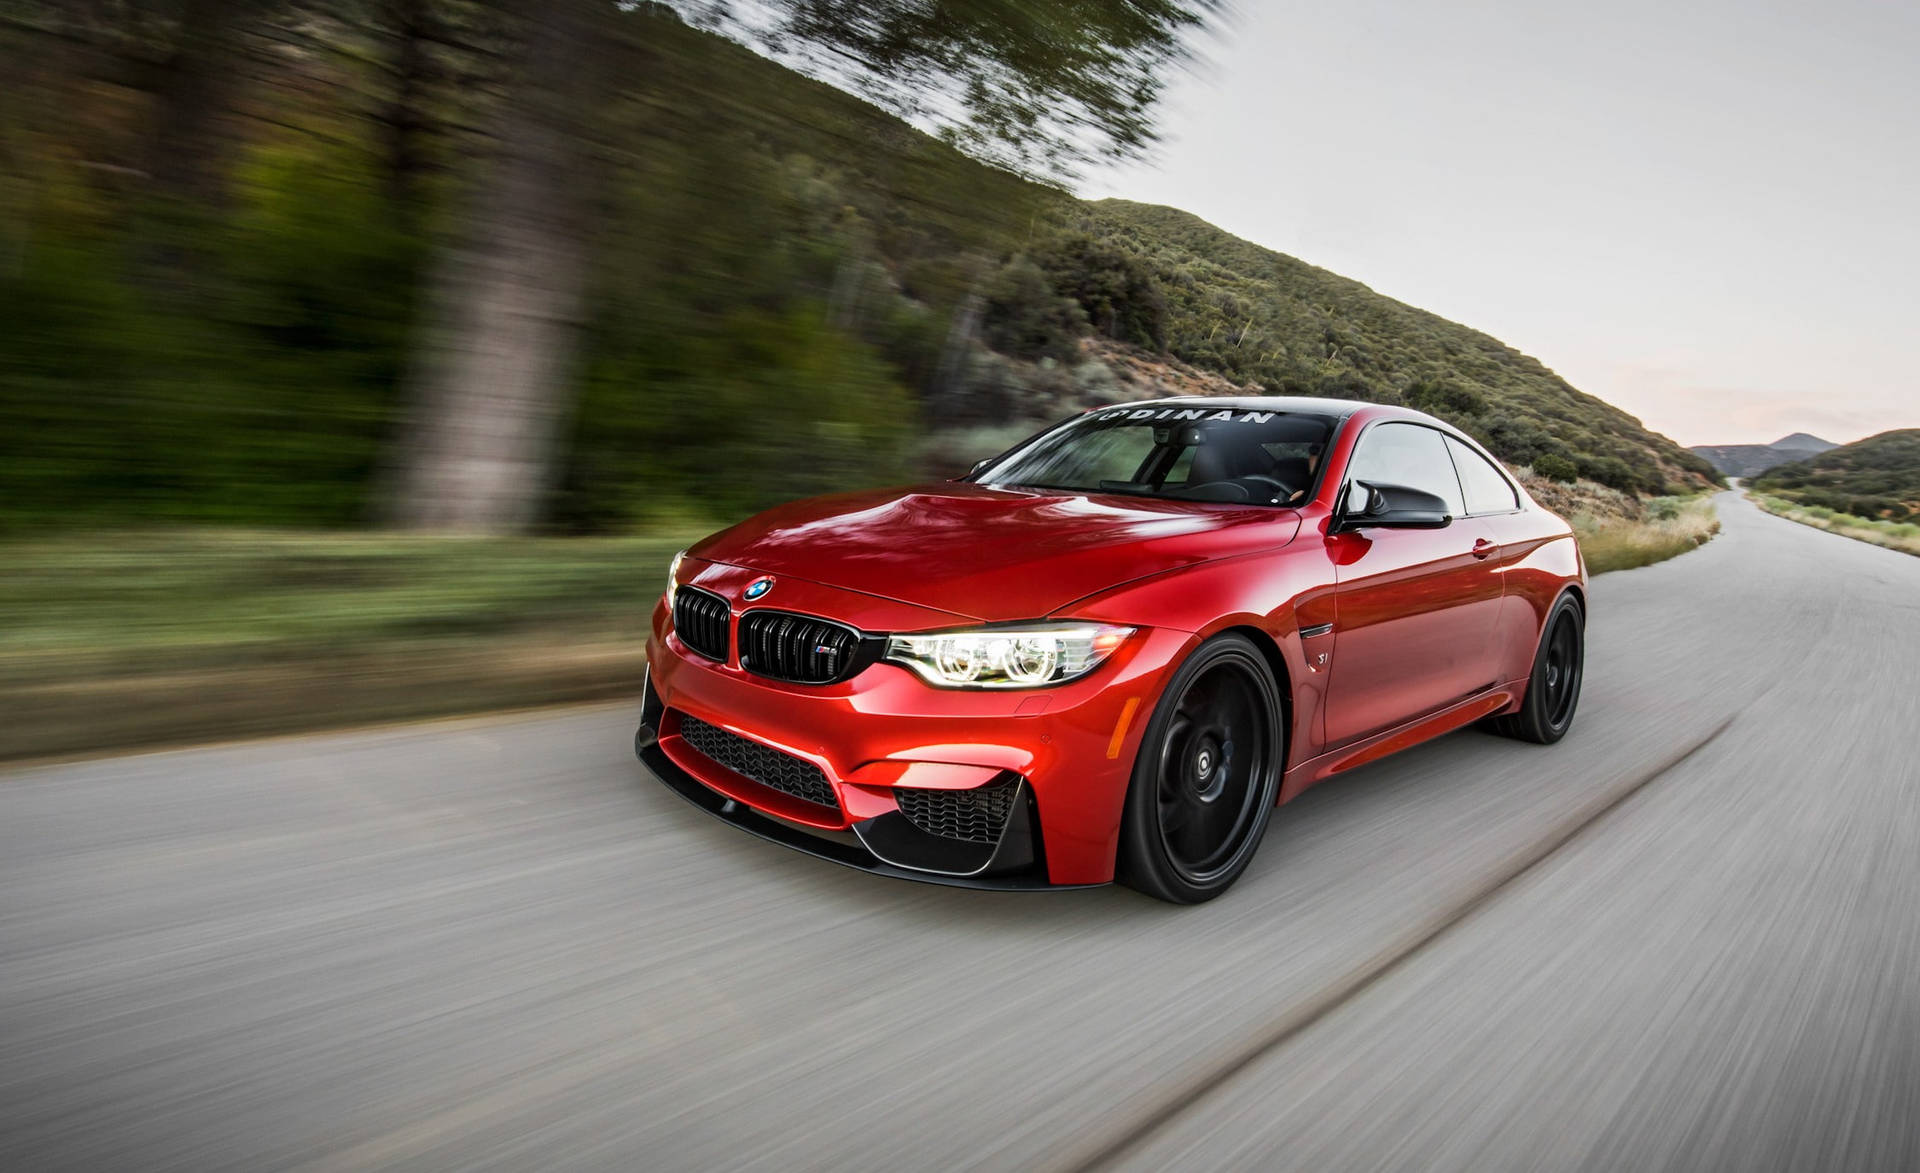 Bmw M4 Zooming On The Road